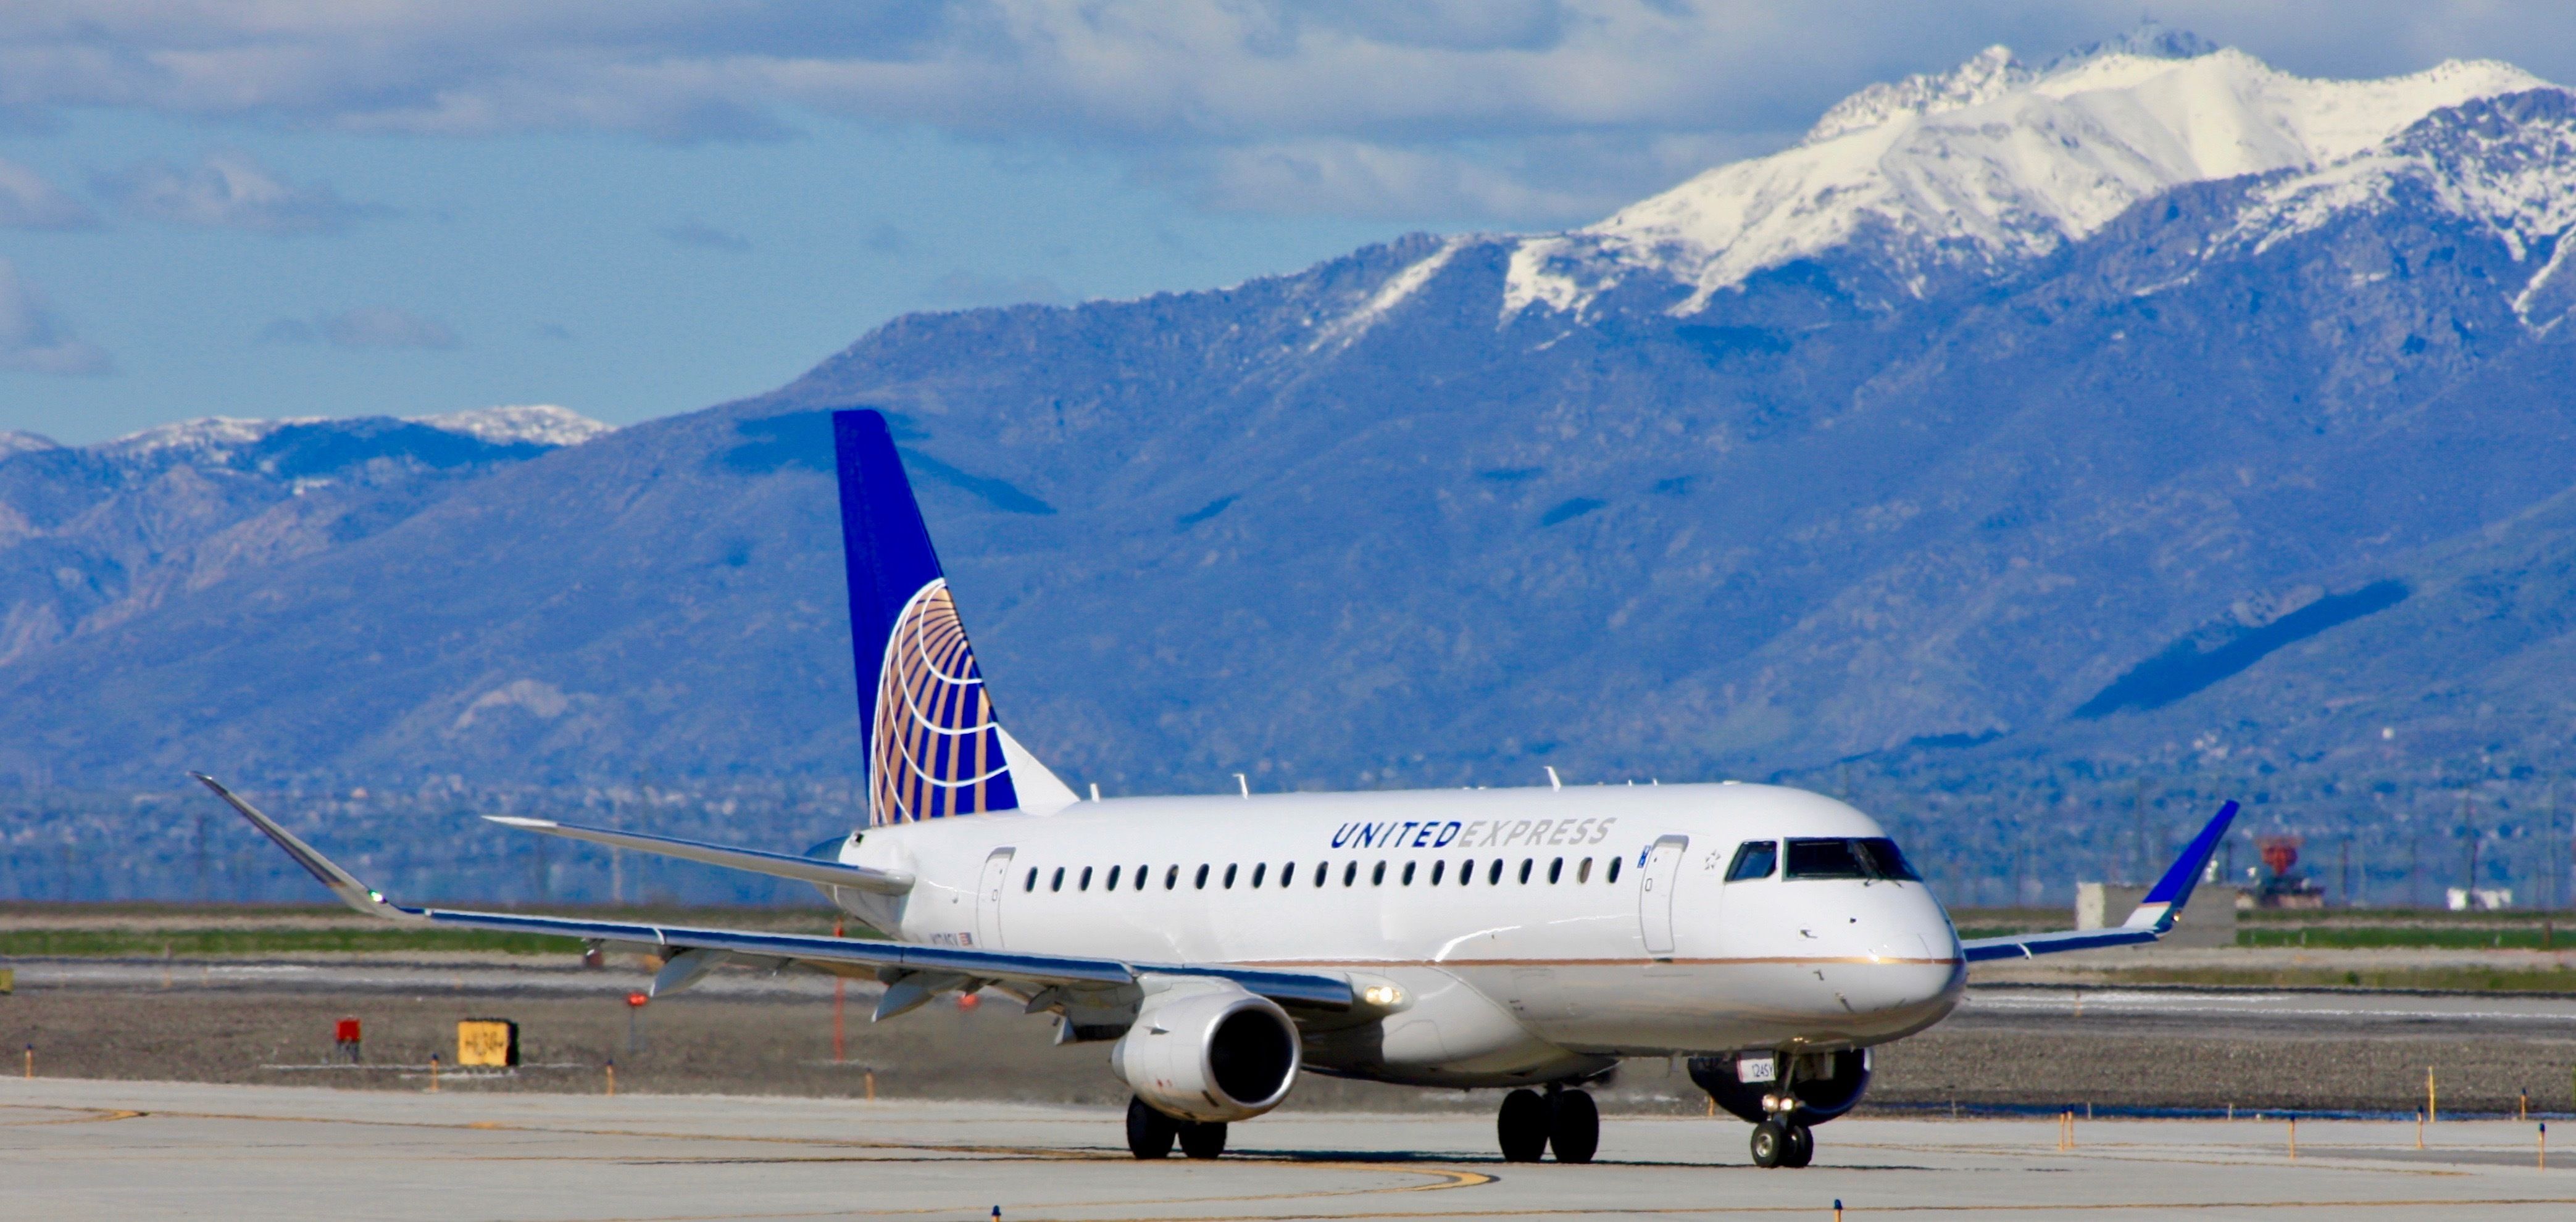 A United Express Embraer E175 on an airport apron.